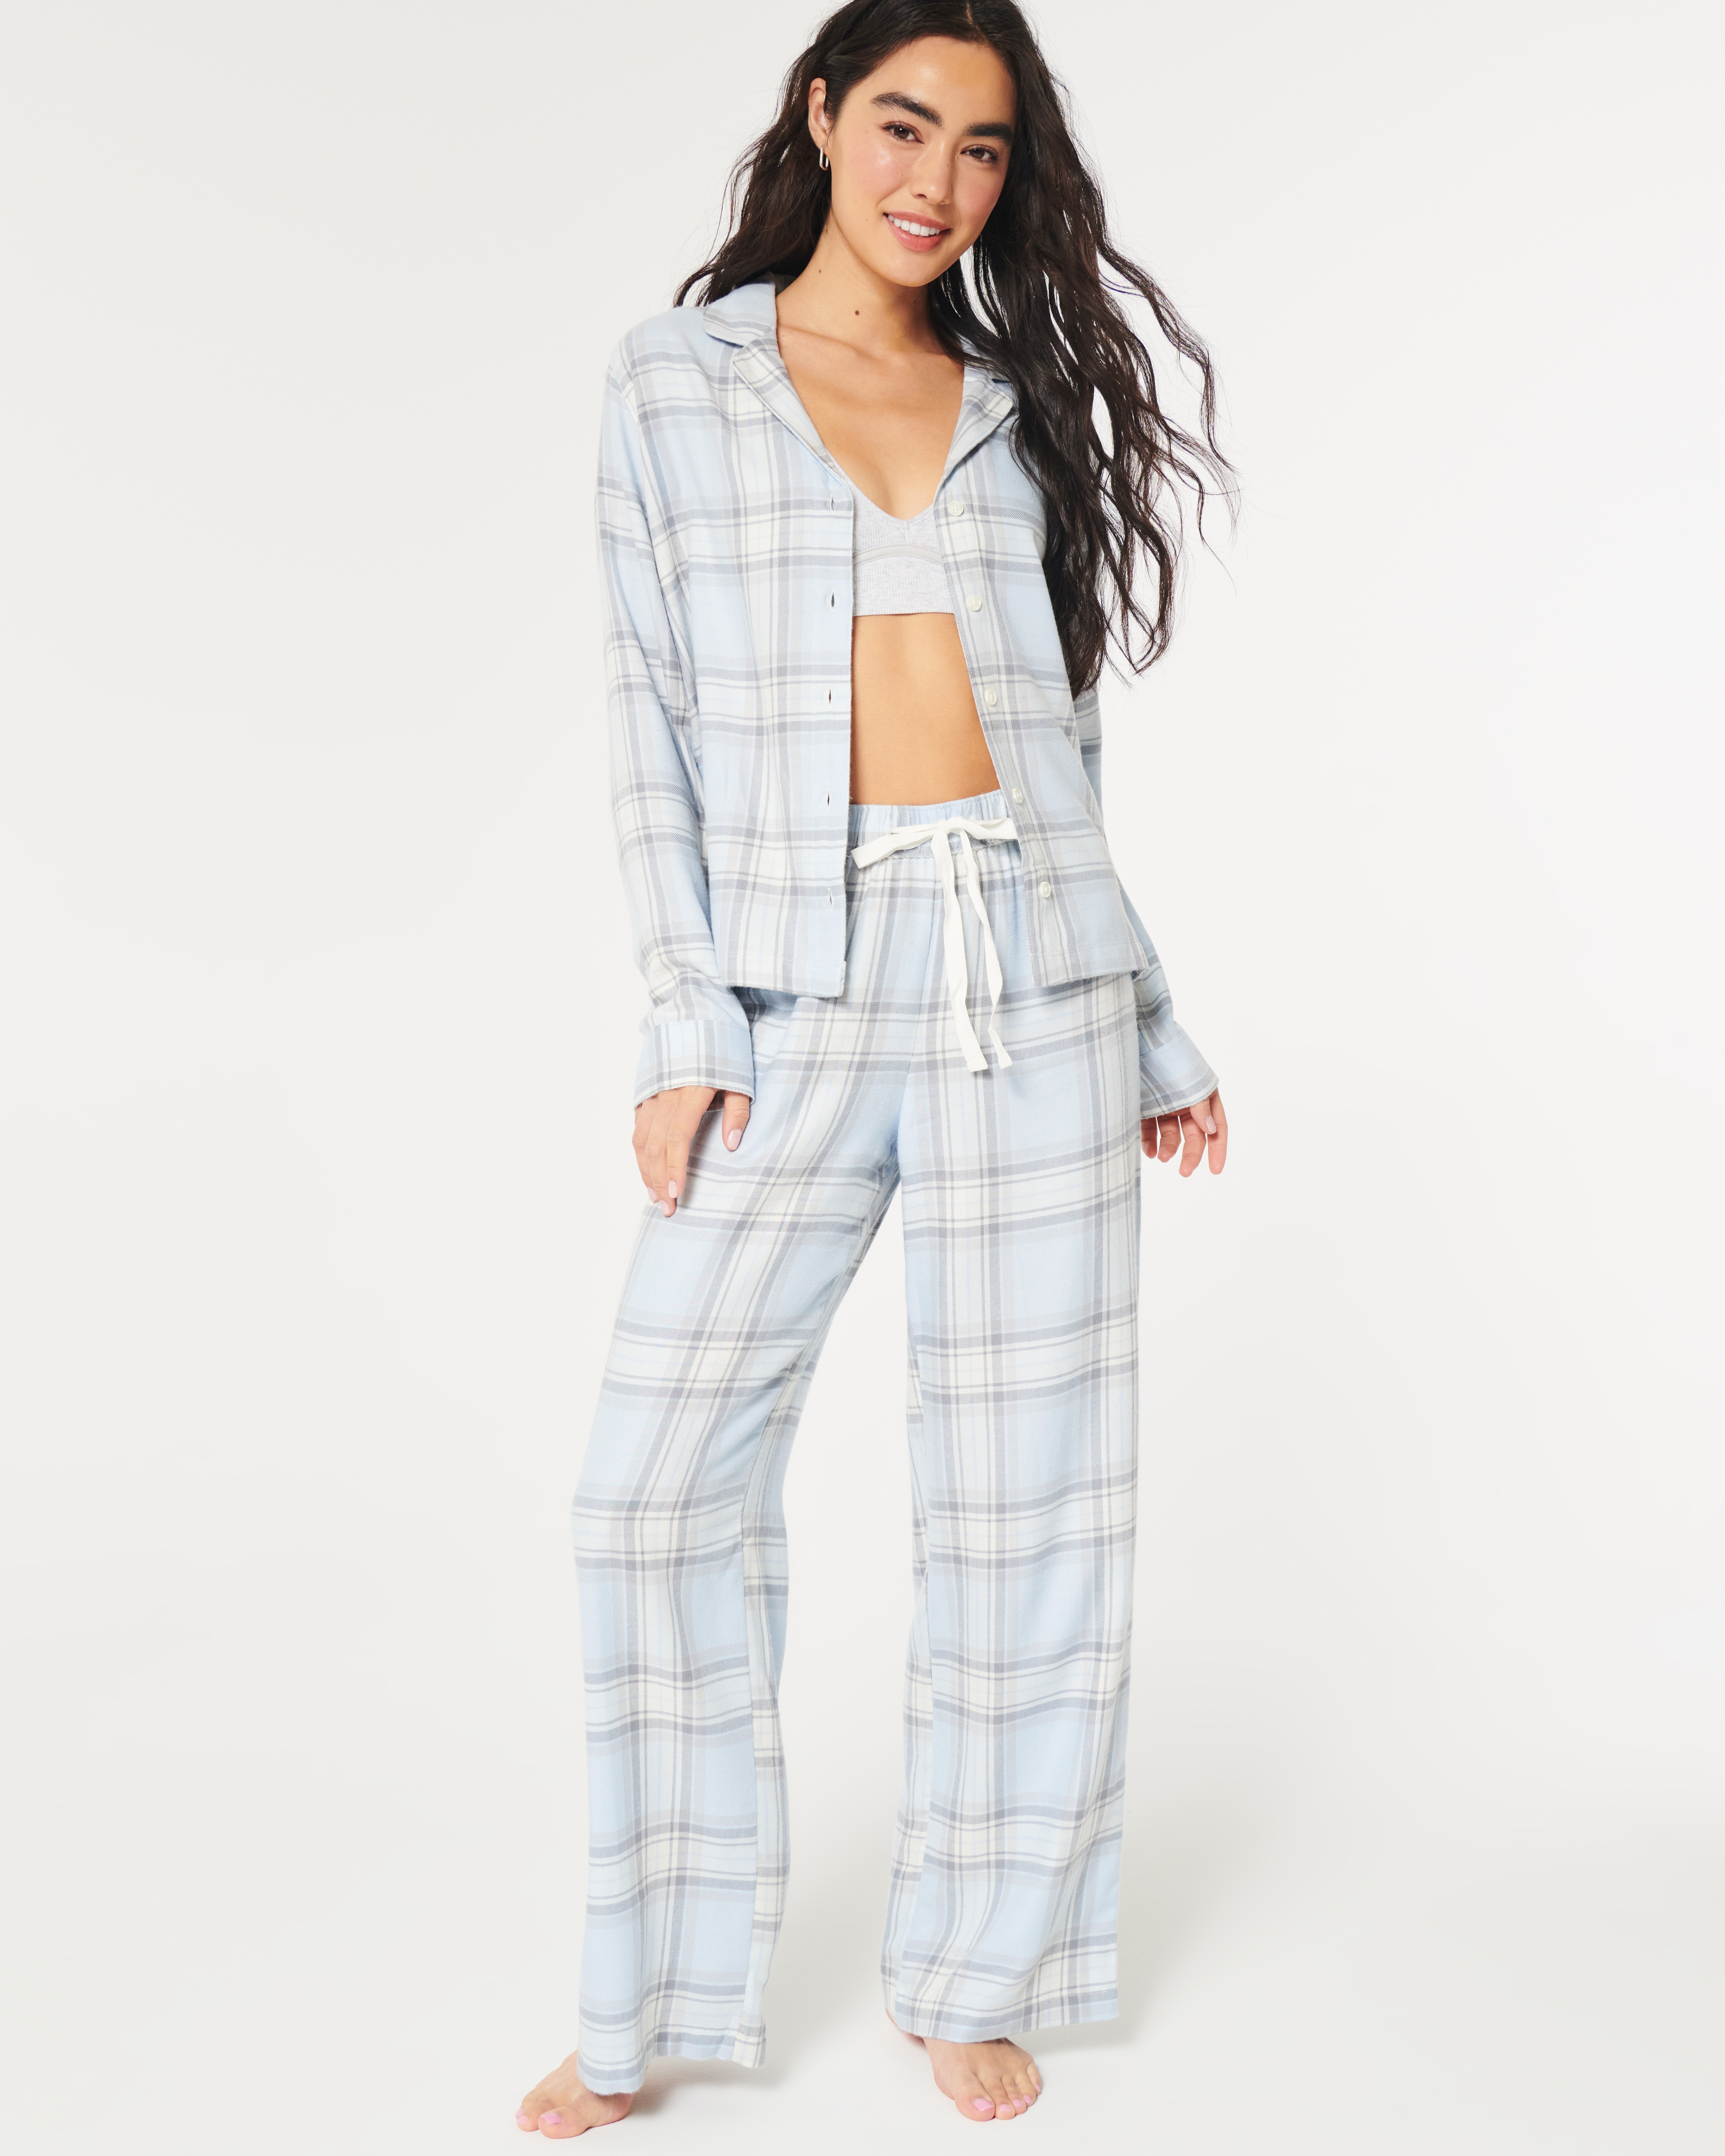 Hollister Gilly Hicks Cozy Sleep Set in White